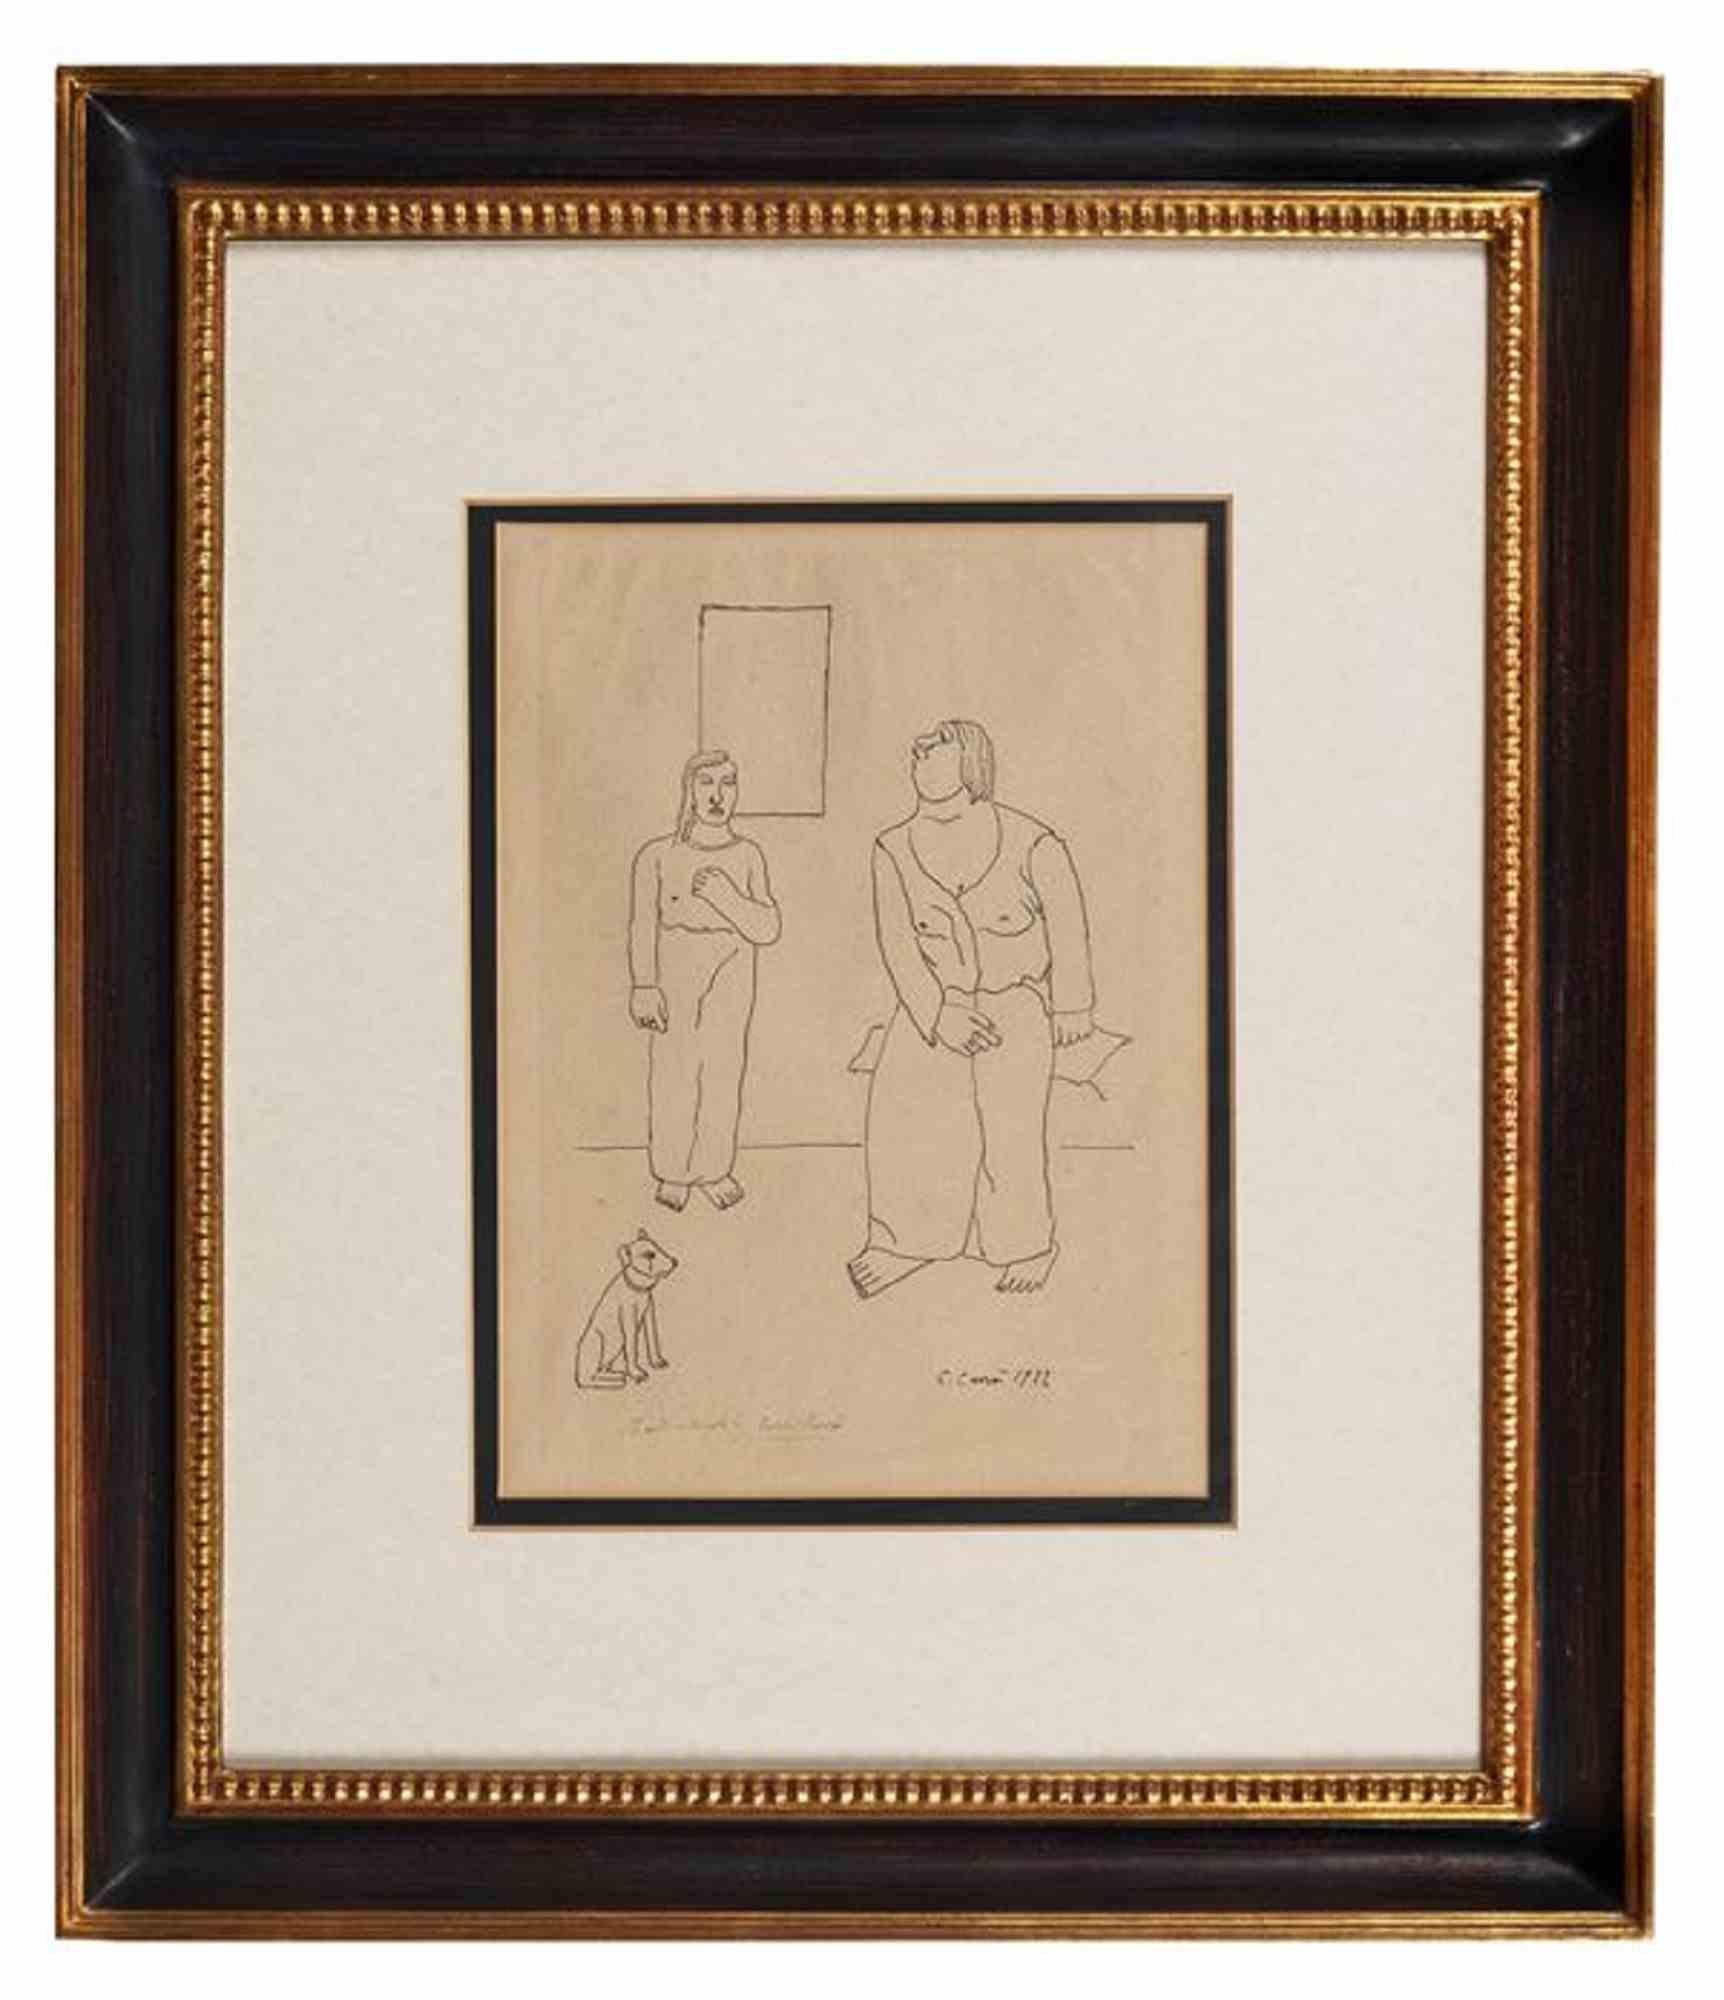 The Acrobats is an original modern artwork realized by Carlo Carrà in 1922.

Lithograph on paper.

Hand signed and dated on the lower margin.

Titled on the lower margin " I Saltimbanchi".

Includes frame:71 x 5.5 x 60.5 cm

This Italian avant-garde